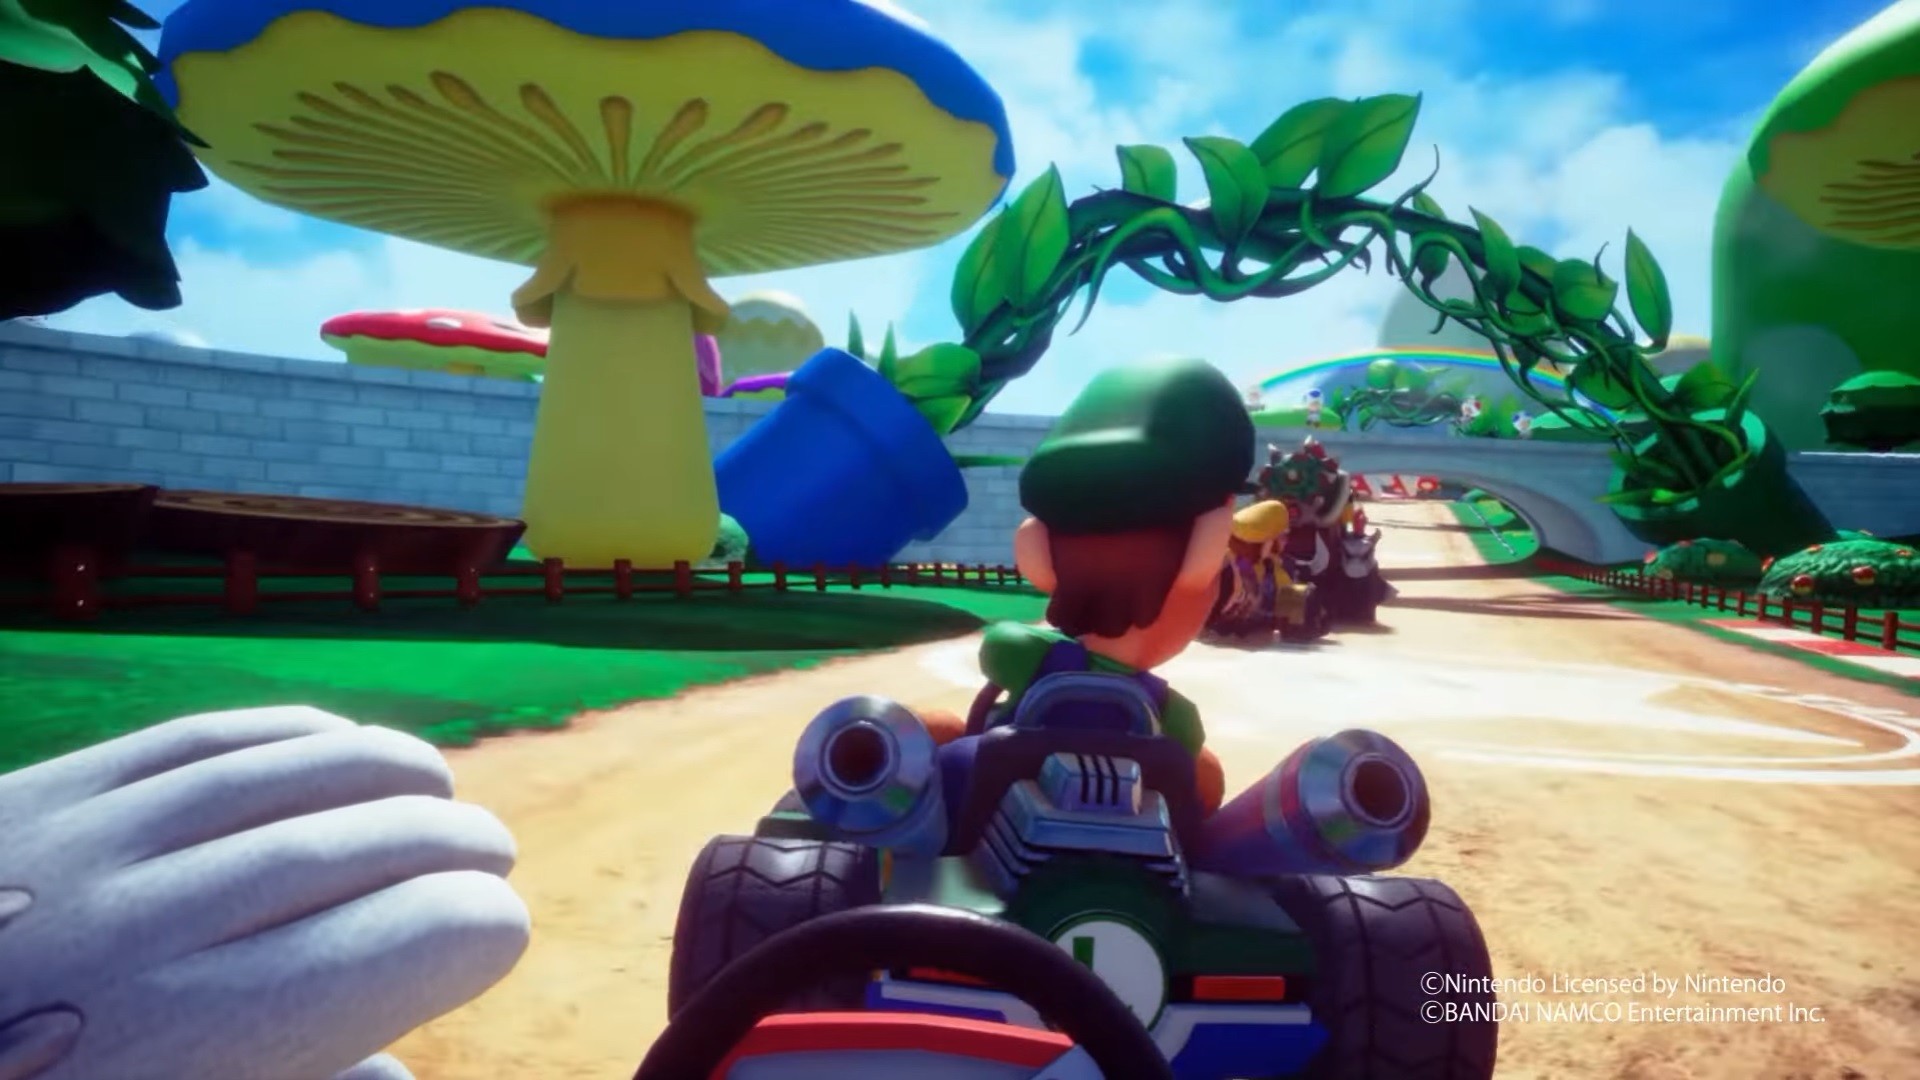 Mario Kart Arcade Gp Vr Is Powered By Htc Vive Virtual Reality Times 4992